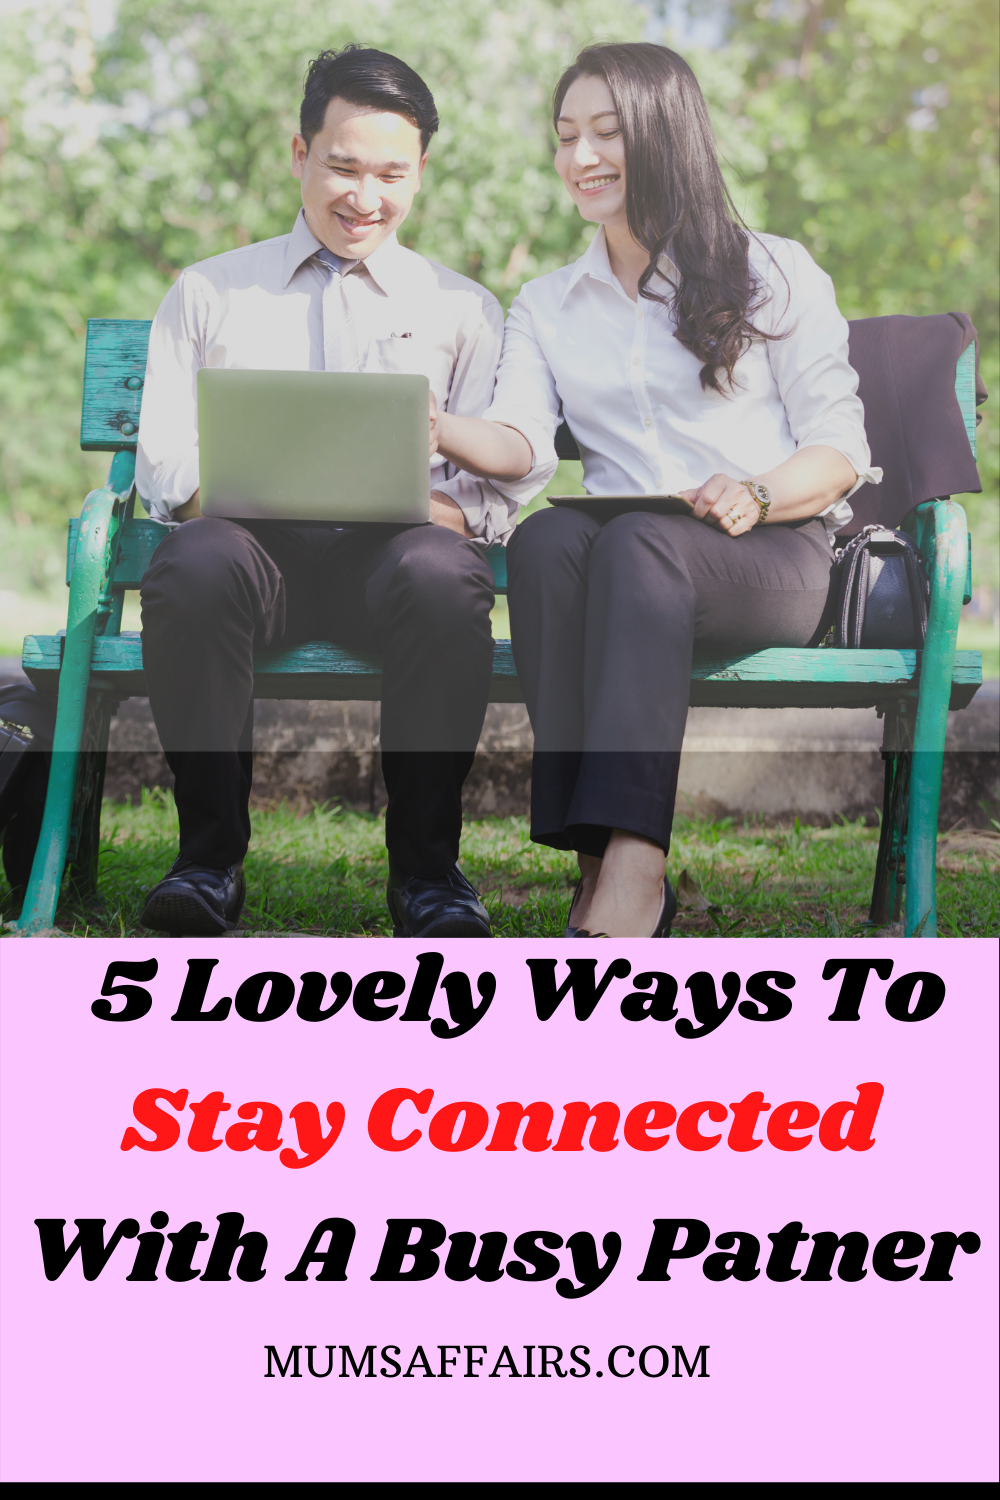 Lovely Ways To stay Connected With A Busy Partner